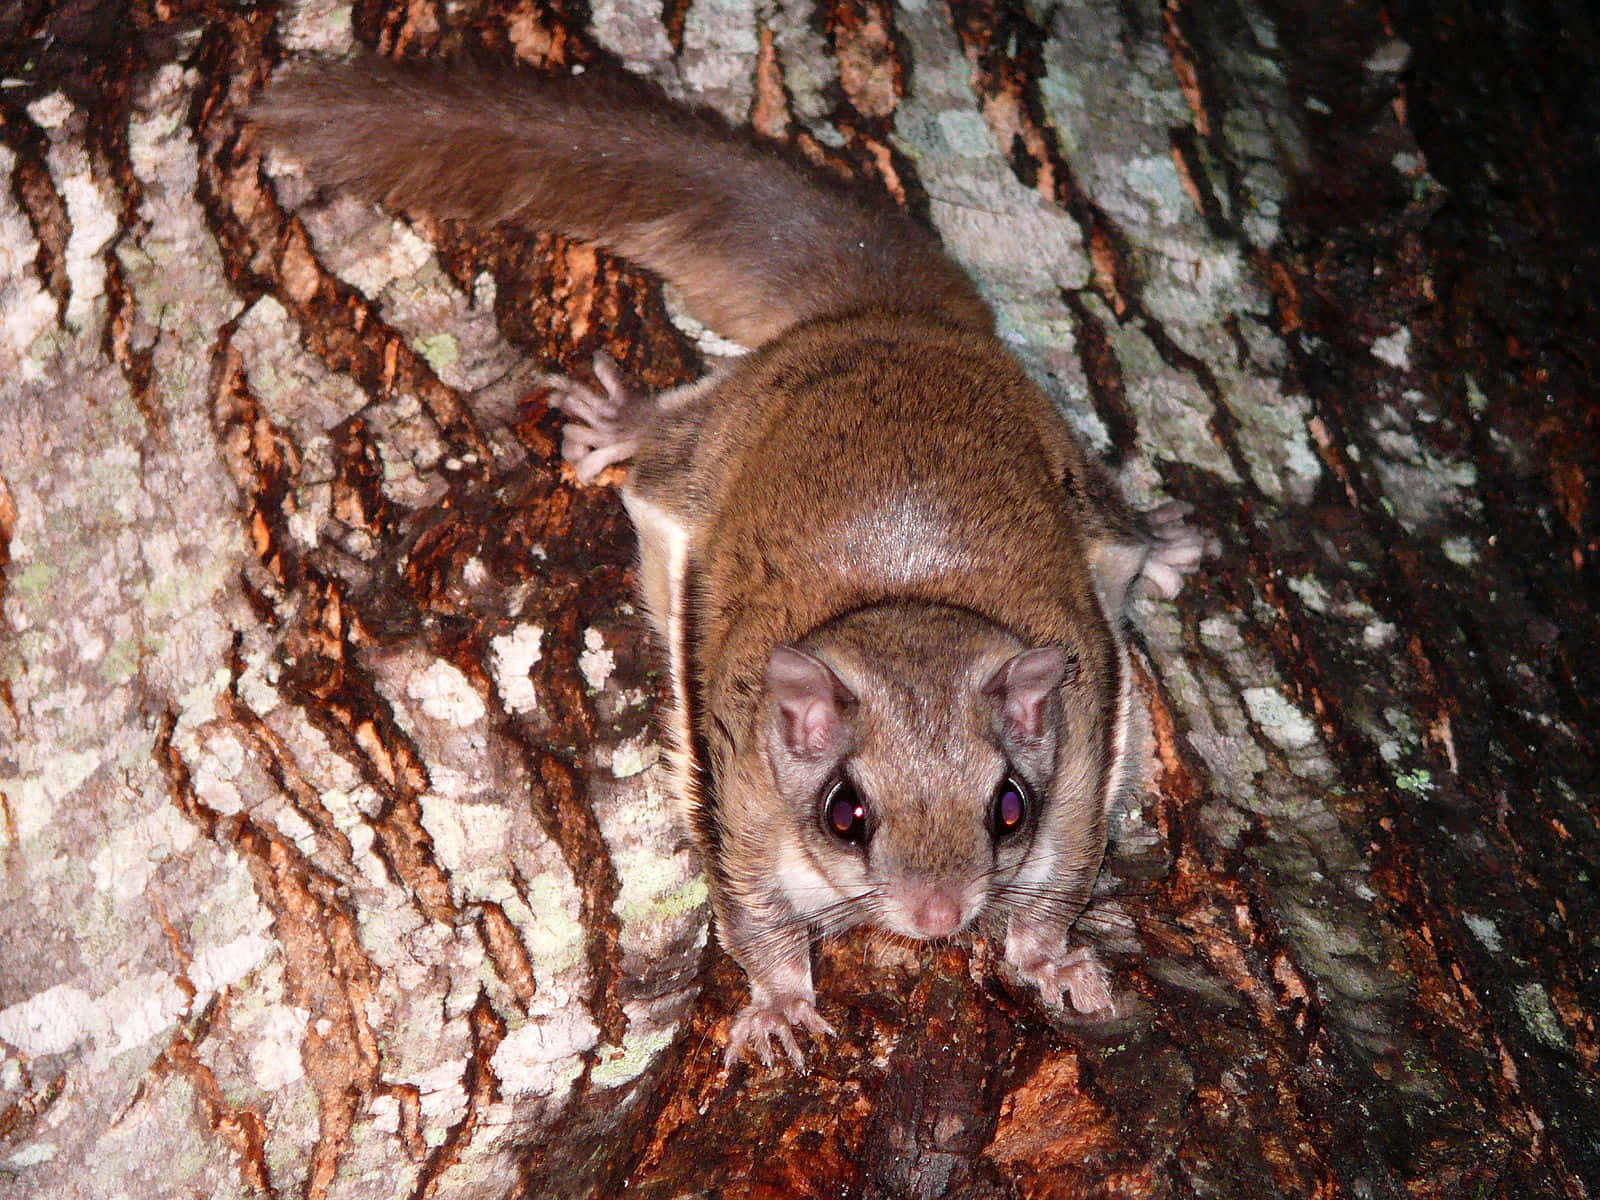 A flying squirrel gliding in the air across a forest.